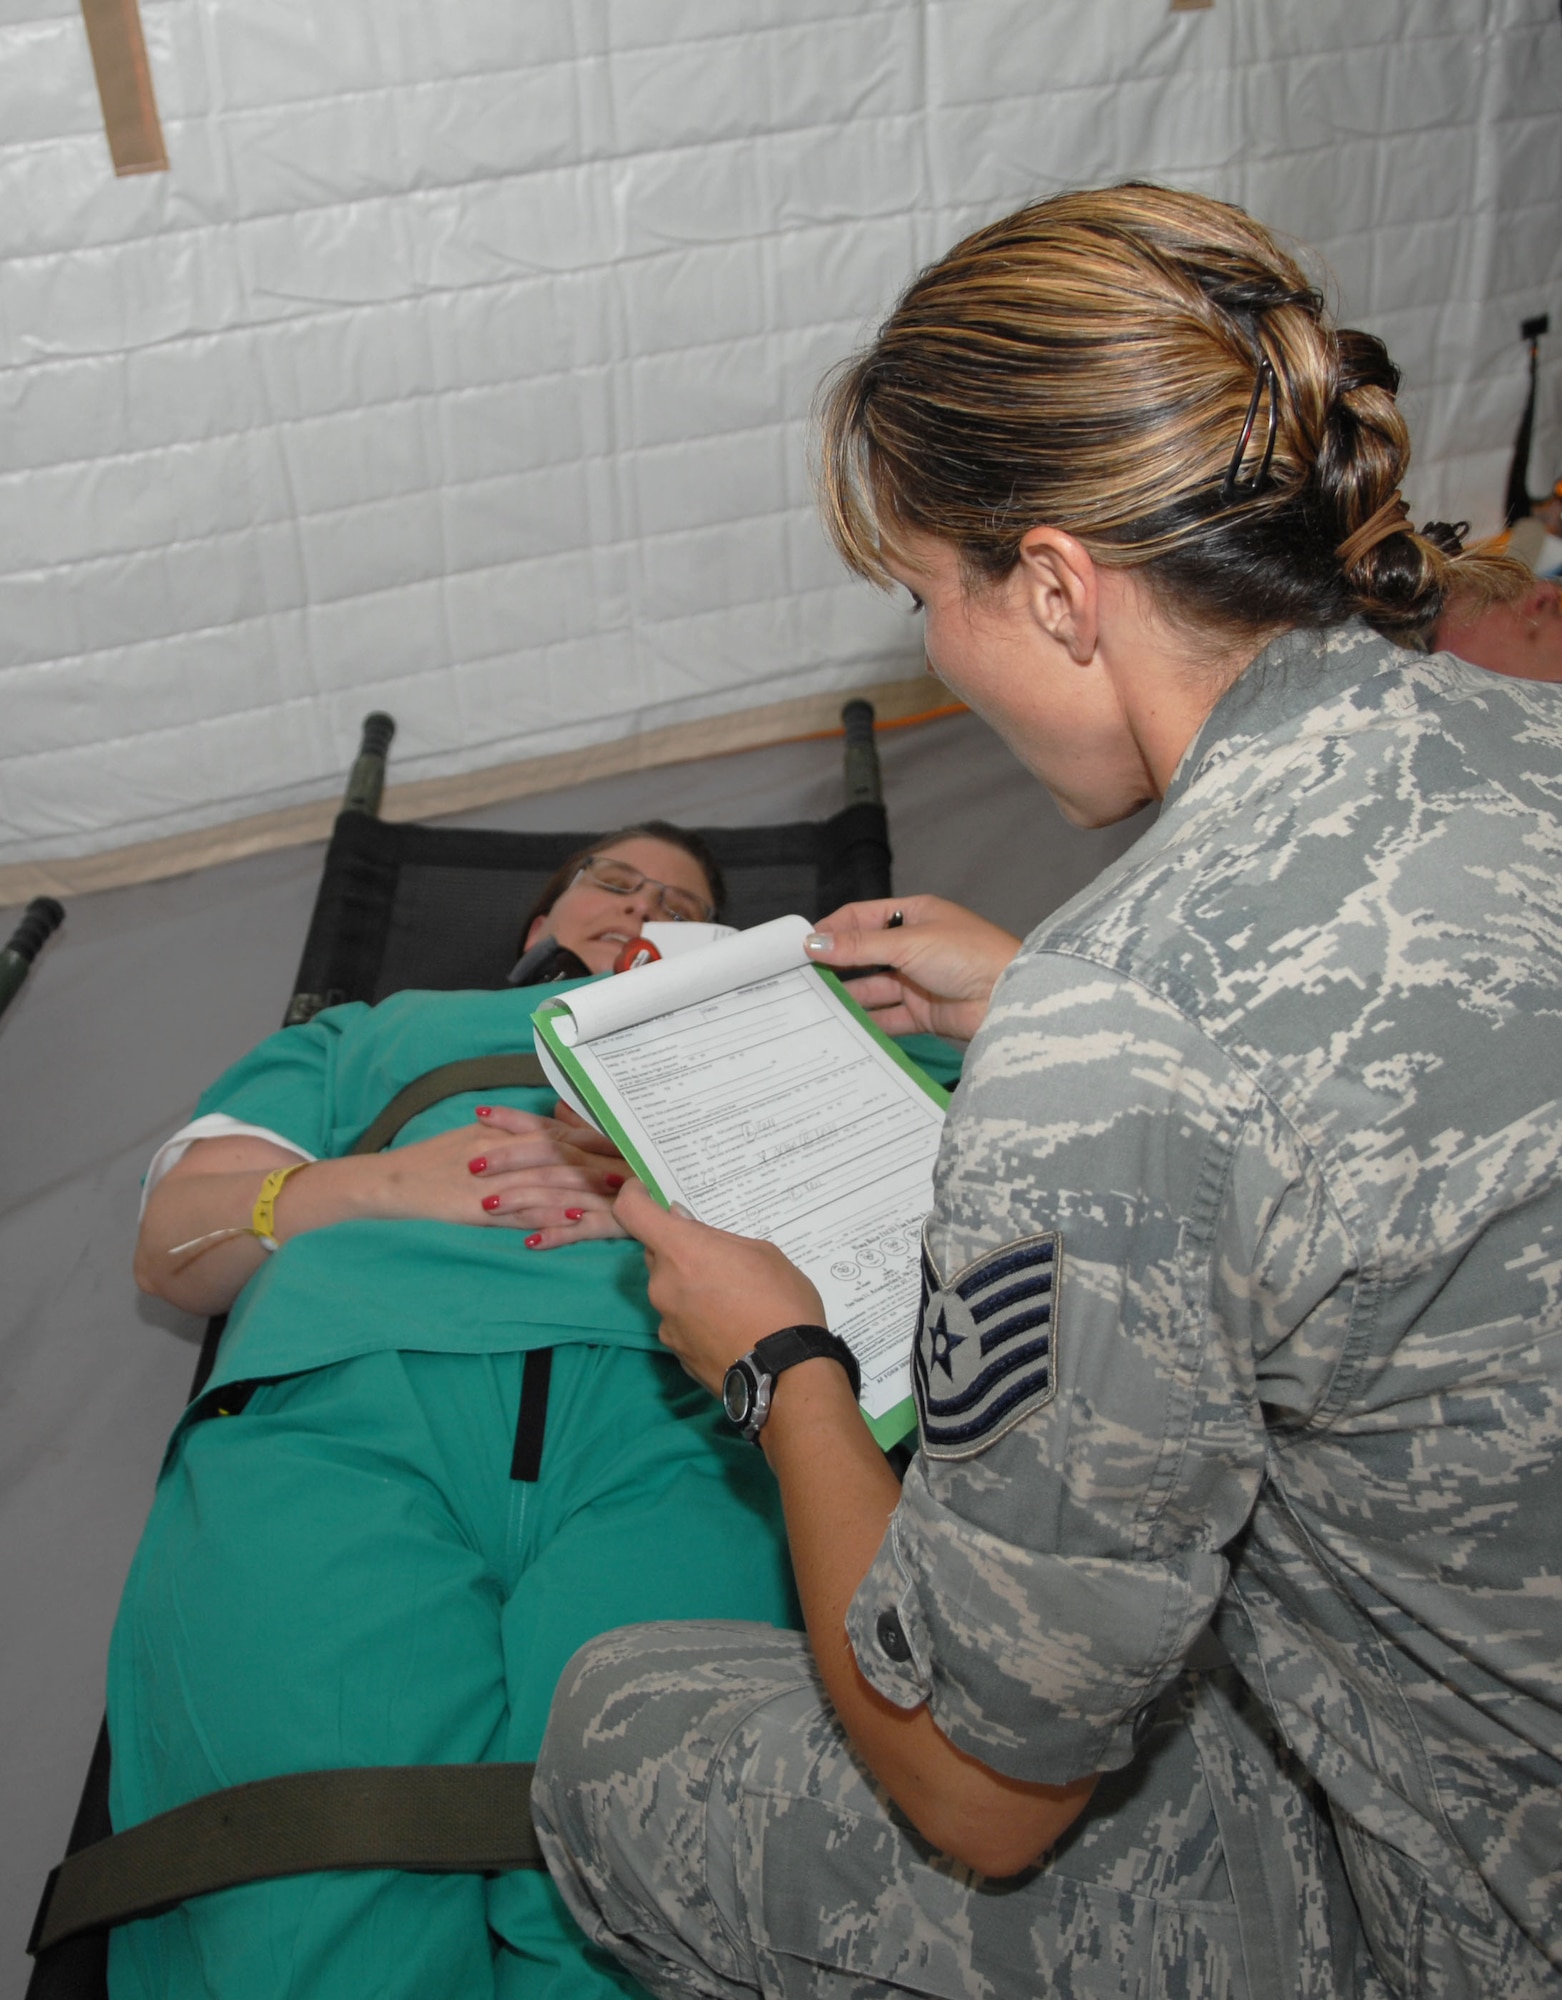 NEW ORLEANS -- Tech. Sgt. Adele Filek, a medical technician from Charleston AFB, S.C., reviews a simulated patient’s chart during an evacuation exercise at the New Orleans Lakefront Airport May 18. The exercise was controlled by the Louisiana Department of Health and Hospitals with the help of multiple military counterparts including Air Mobility Command and U.S. Transportation Command members from Scott AFB. (U.S. Air Force photo by Senior Airman Samantha S. Crane)